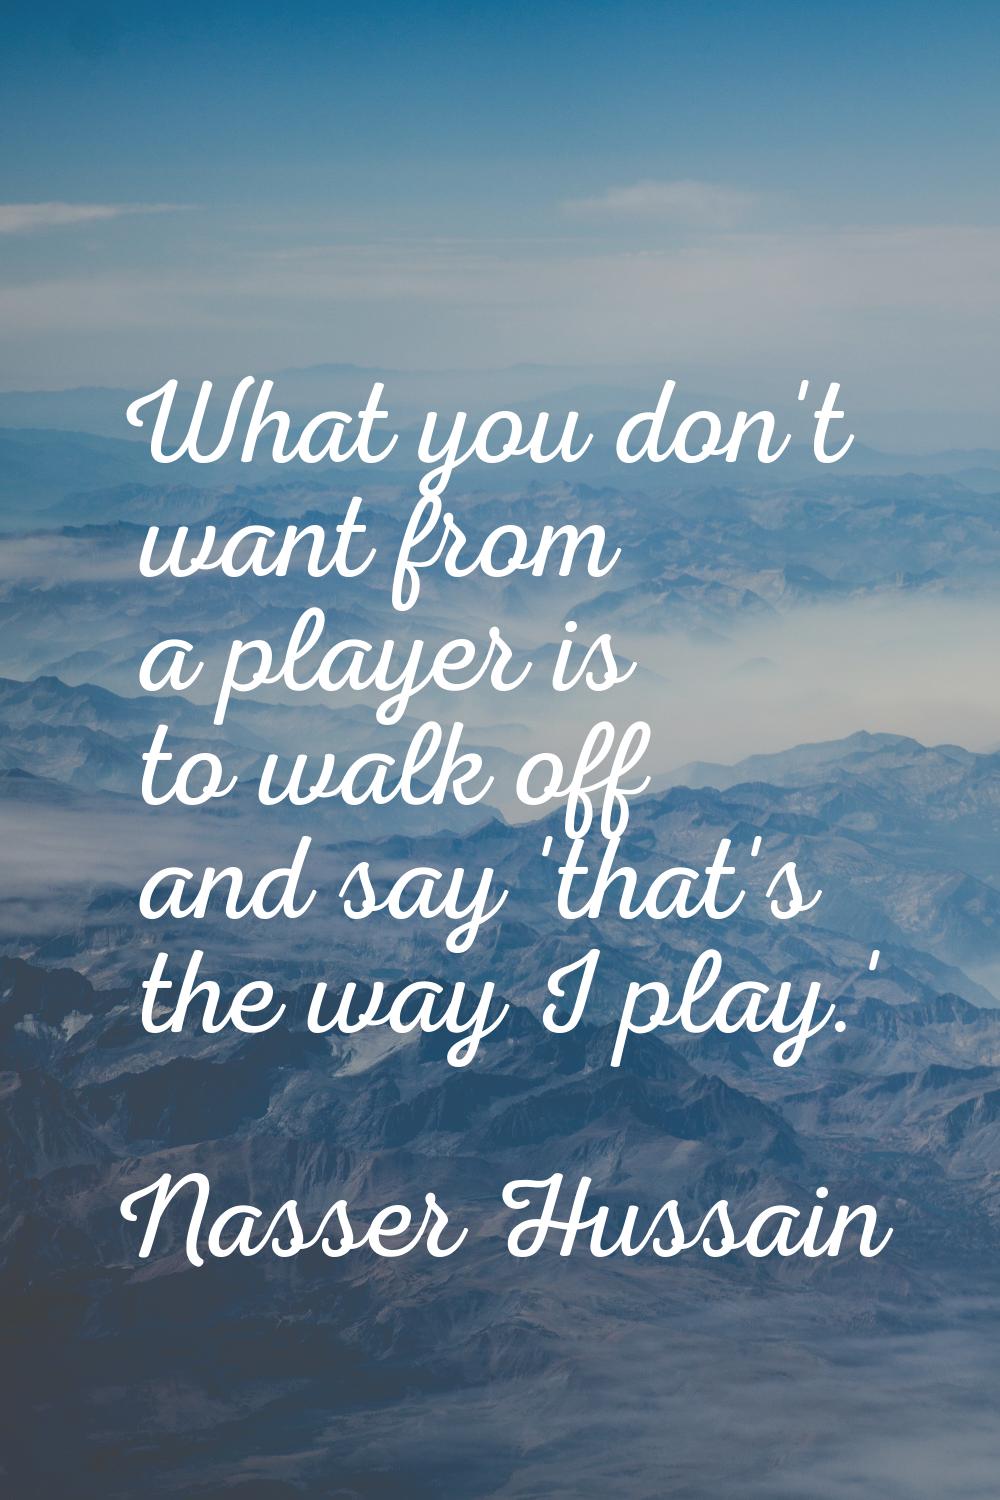 What you don't want from a player is to walk off and say 'that's the way I play.'